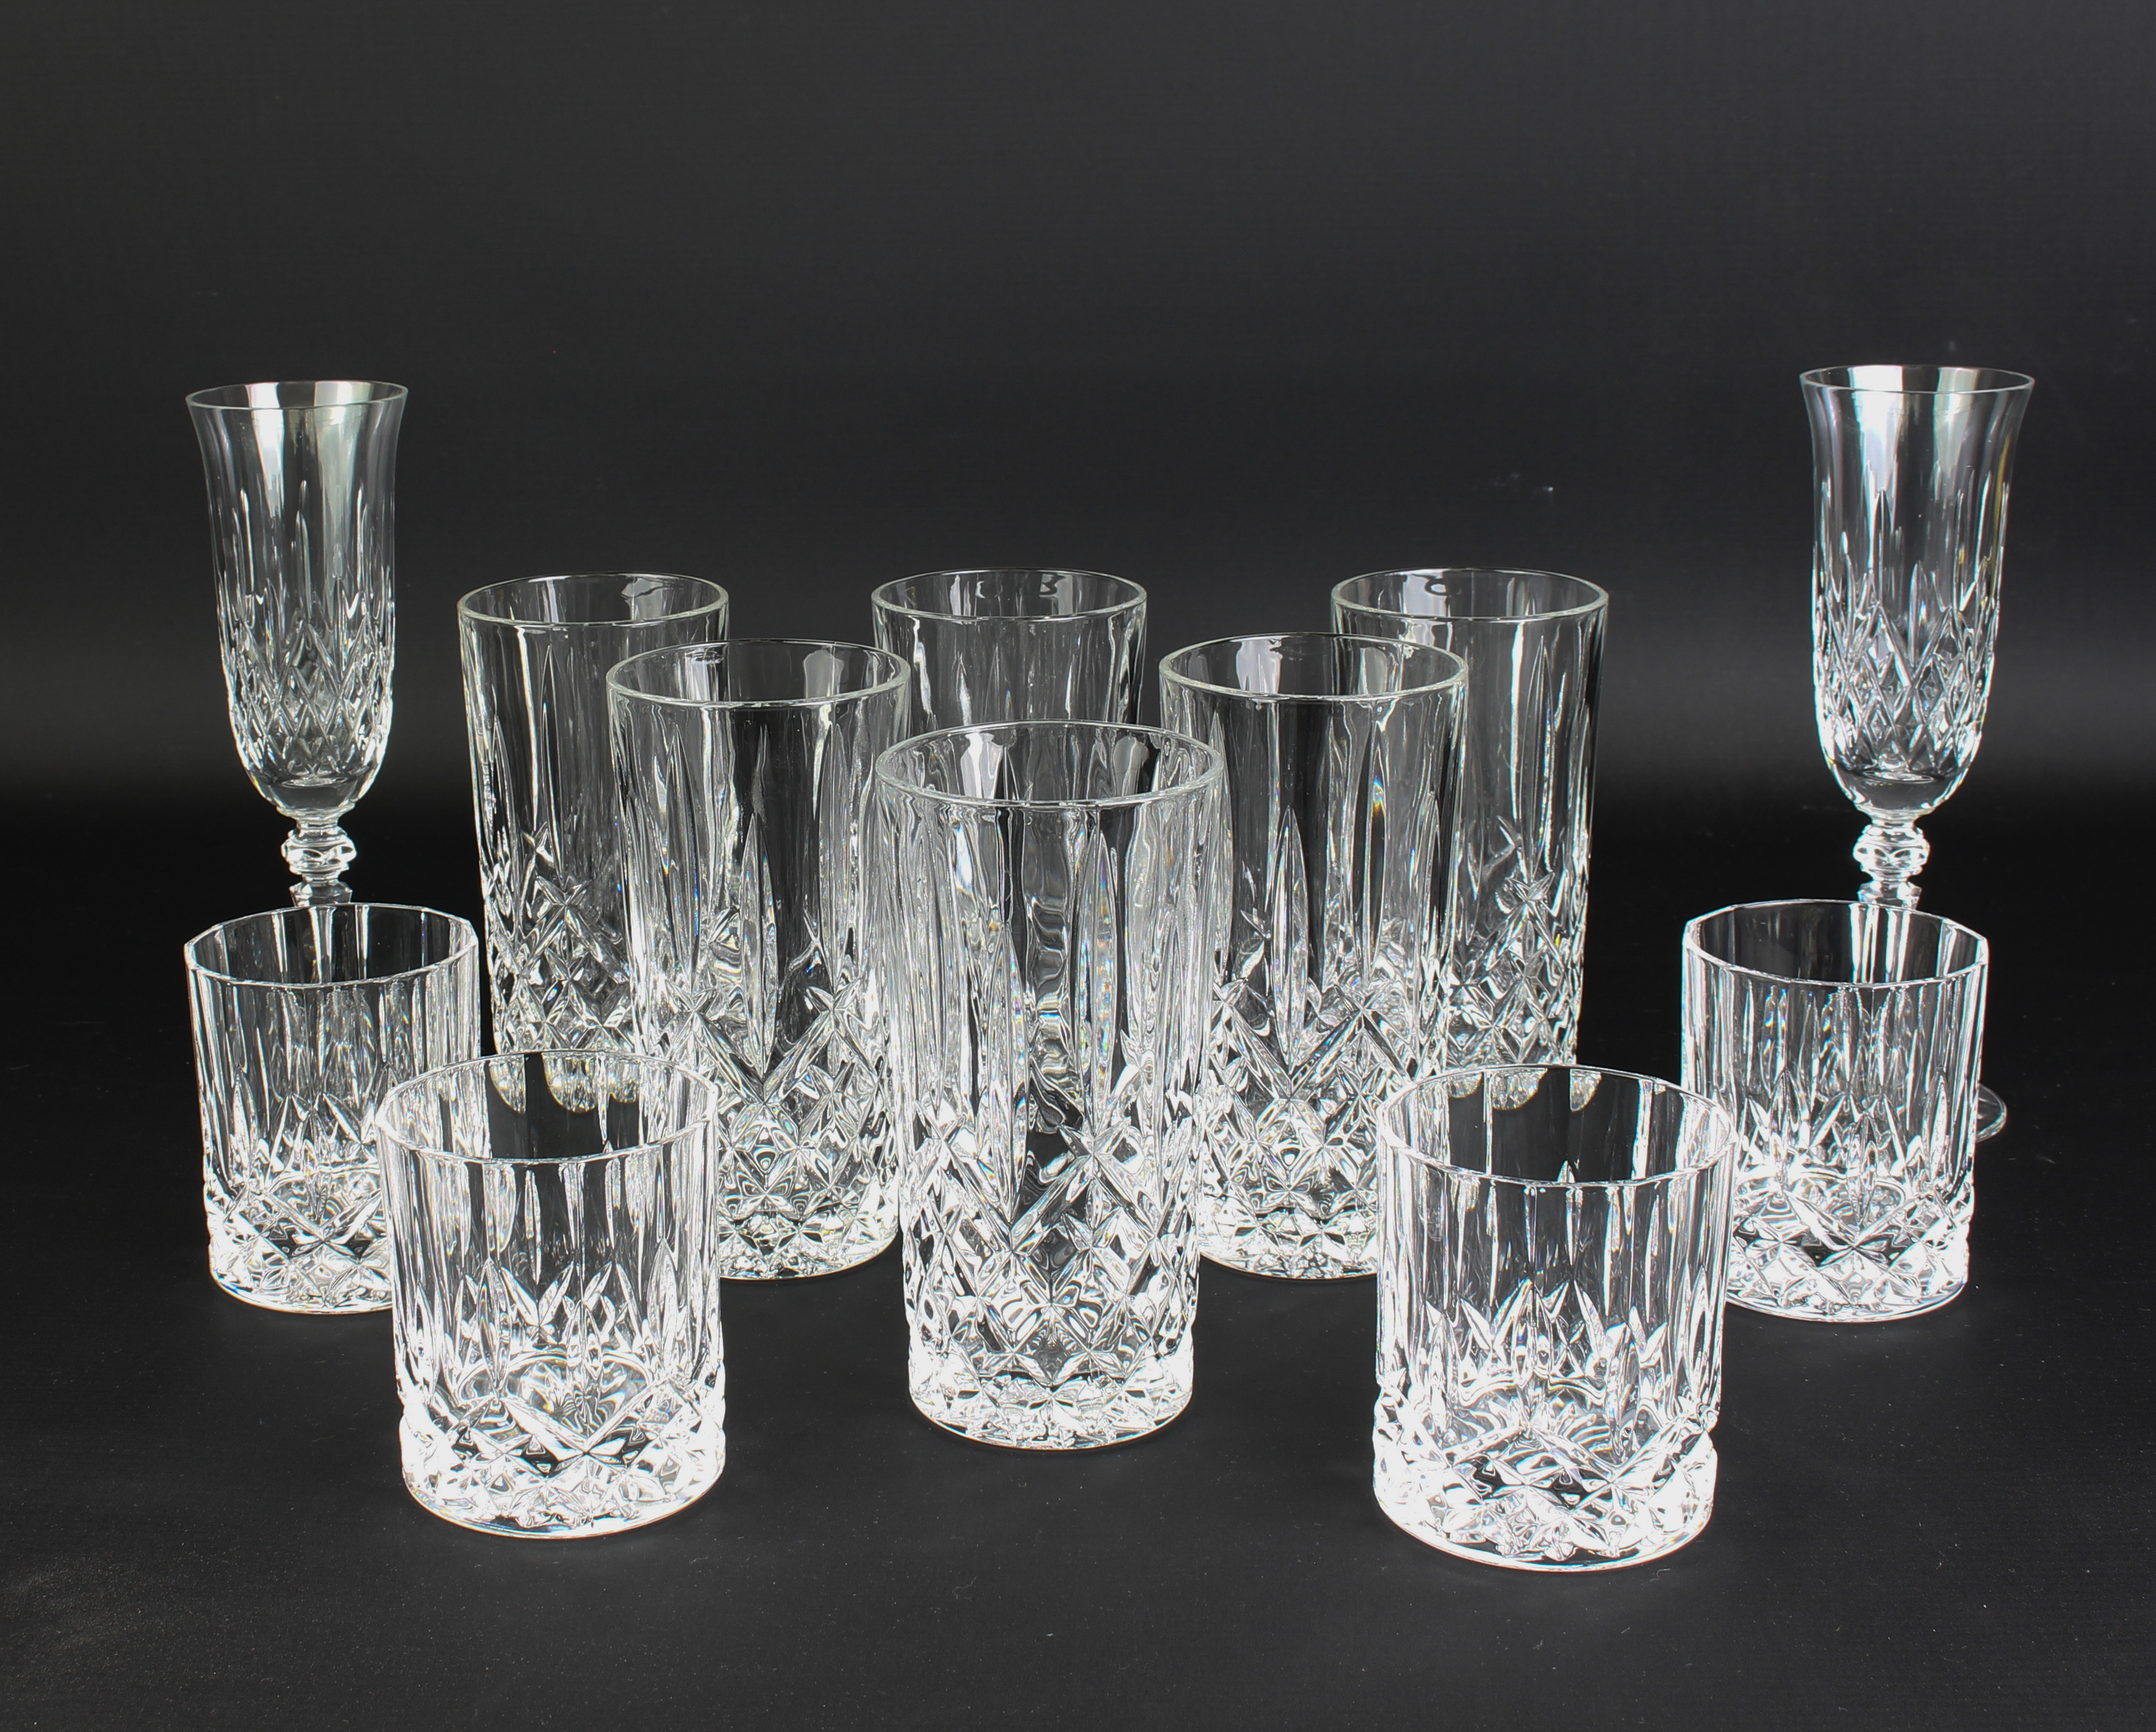 A pair of Galway cut glass champagne flutes - etched factory mark, 20.6 cm high; together with a set